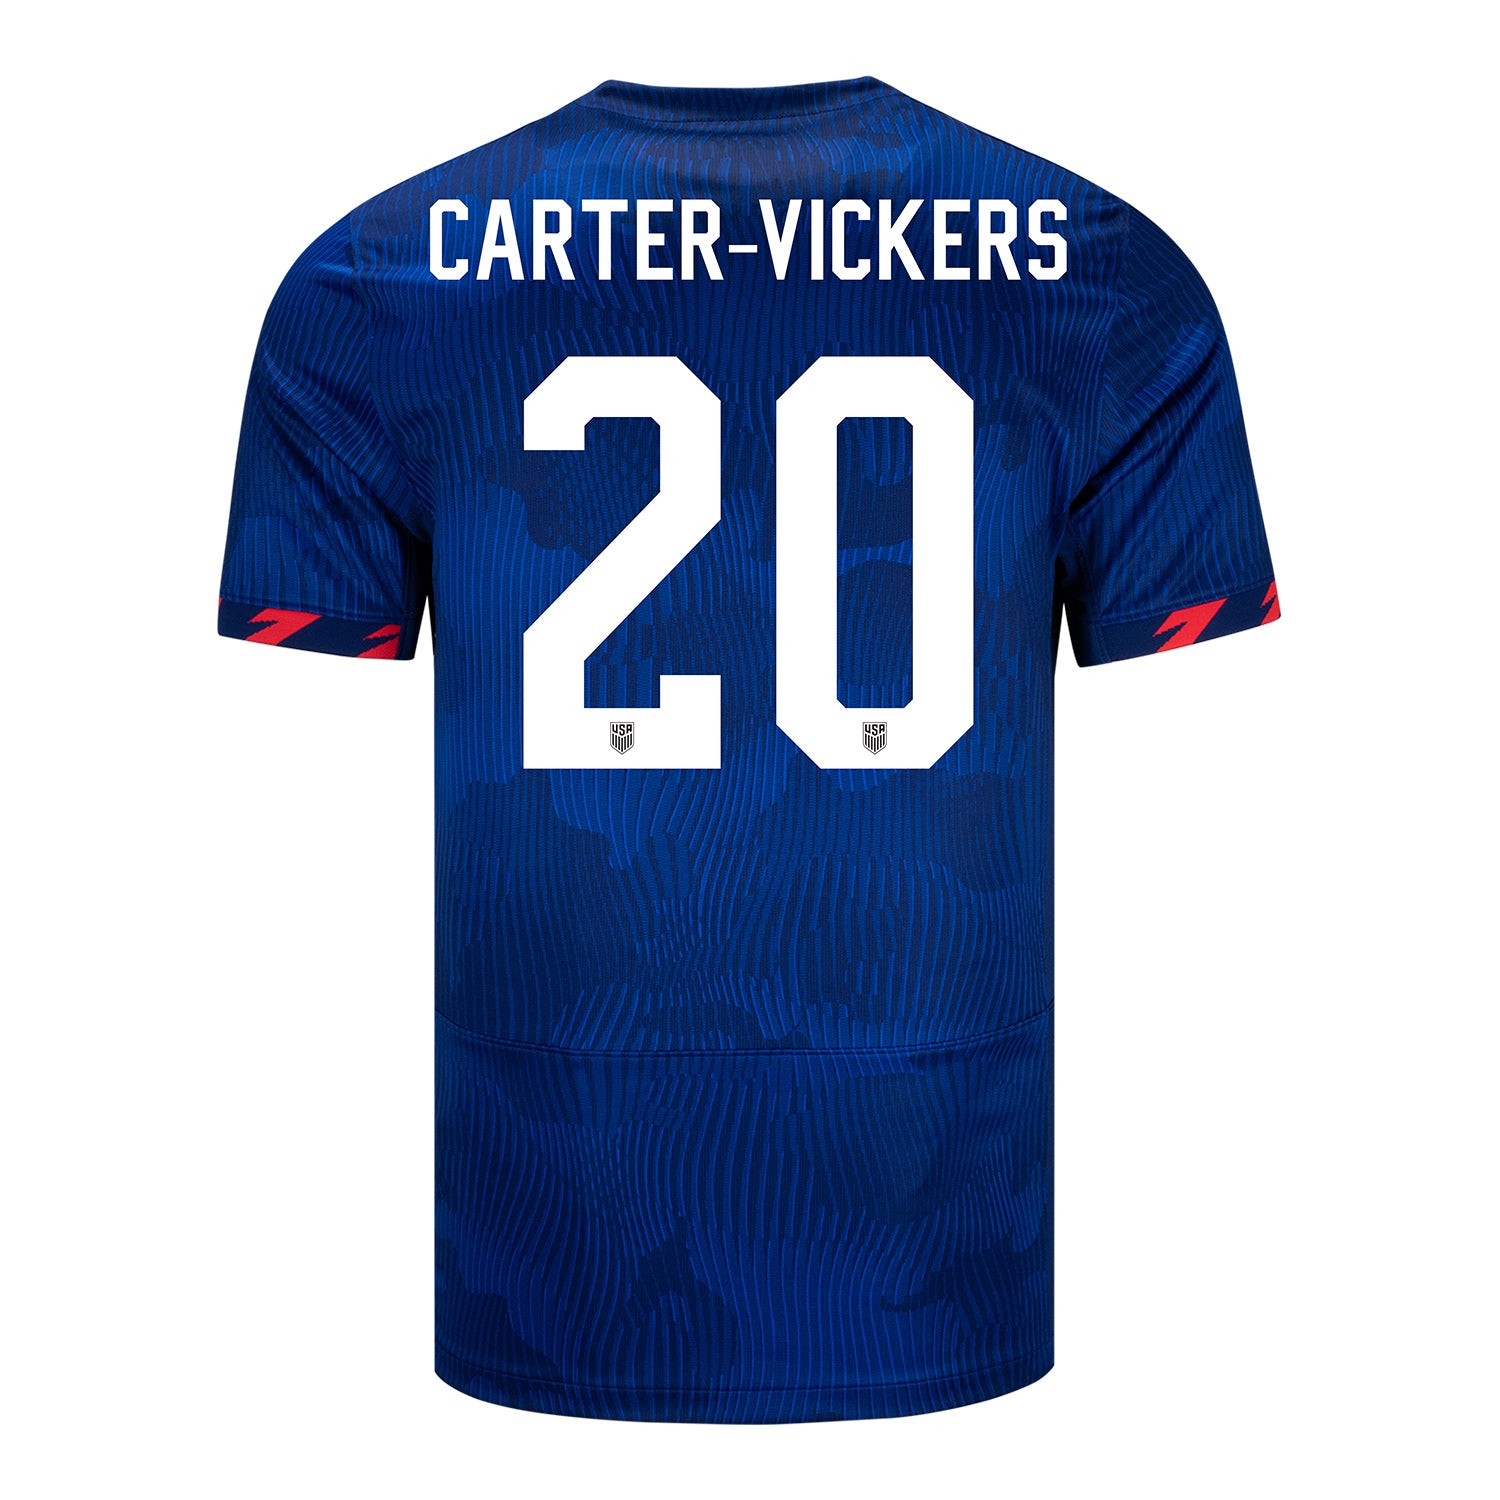 Men's Nike USMNT 2023 Personalized Away Match Jersey in Blue - Back View